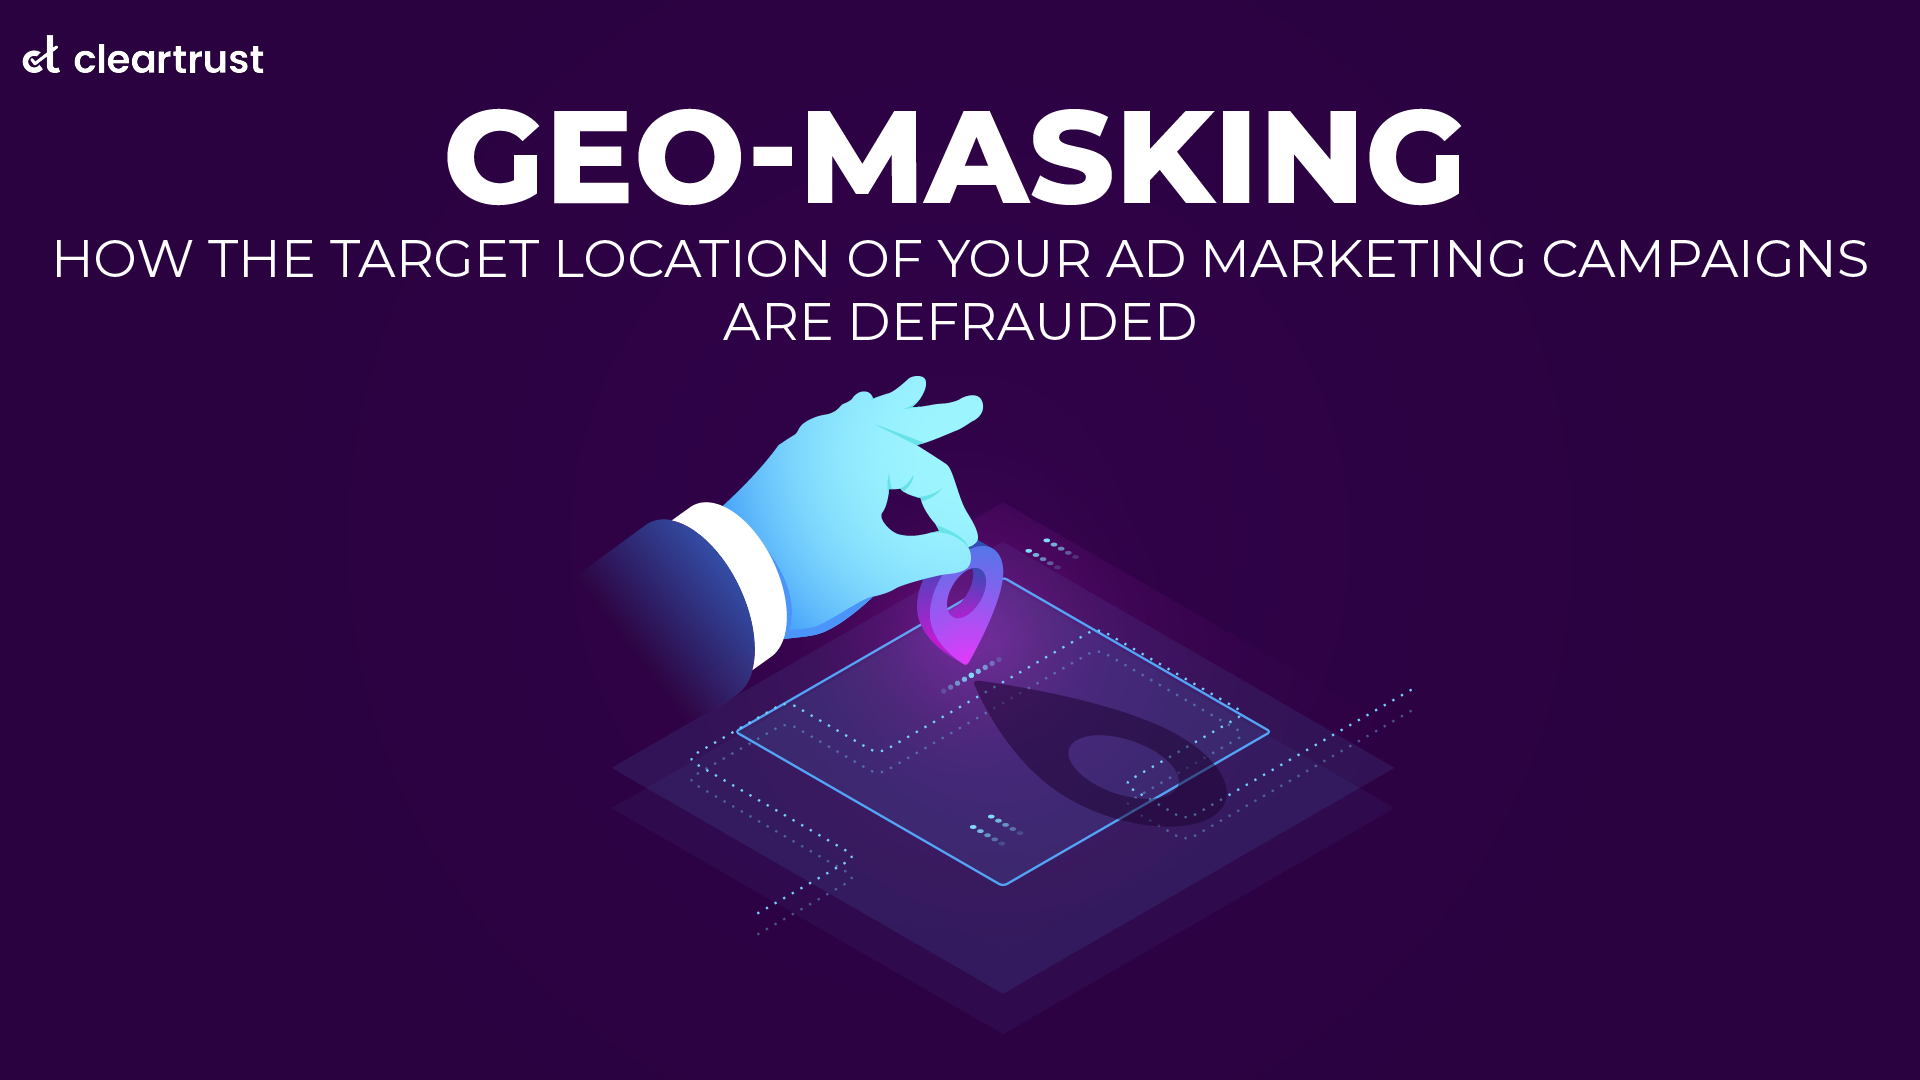 Geo-masking - How the target location of your e-advertising campaigns are defrauded